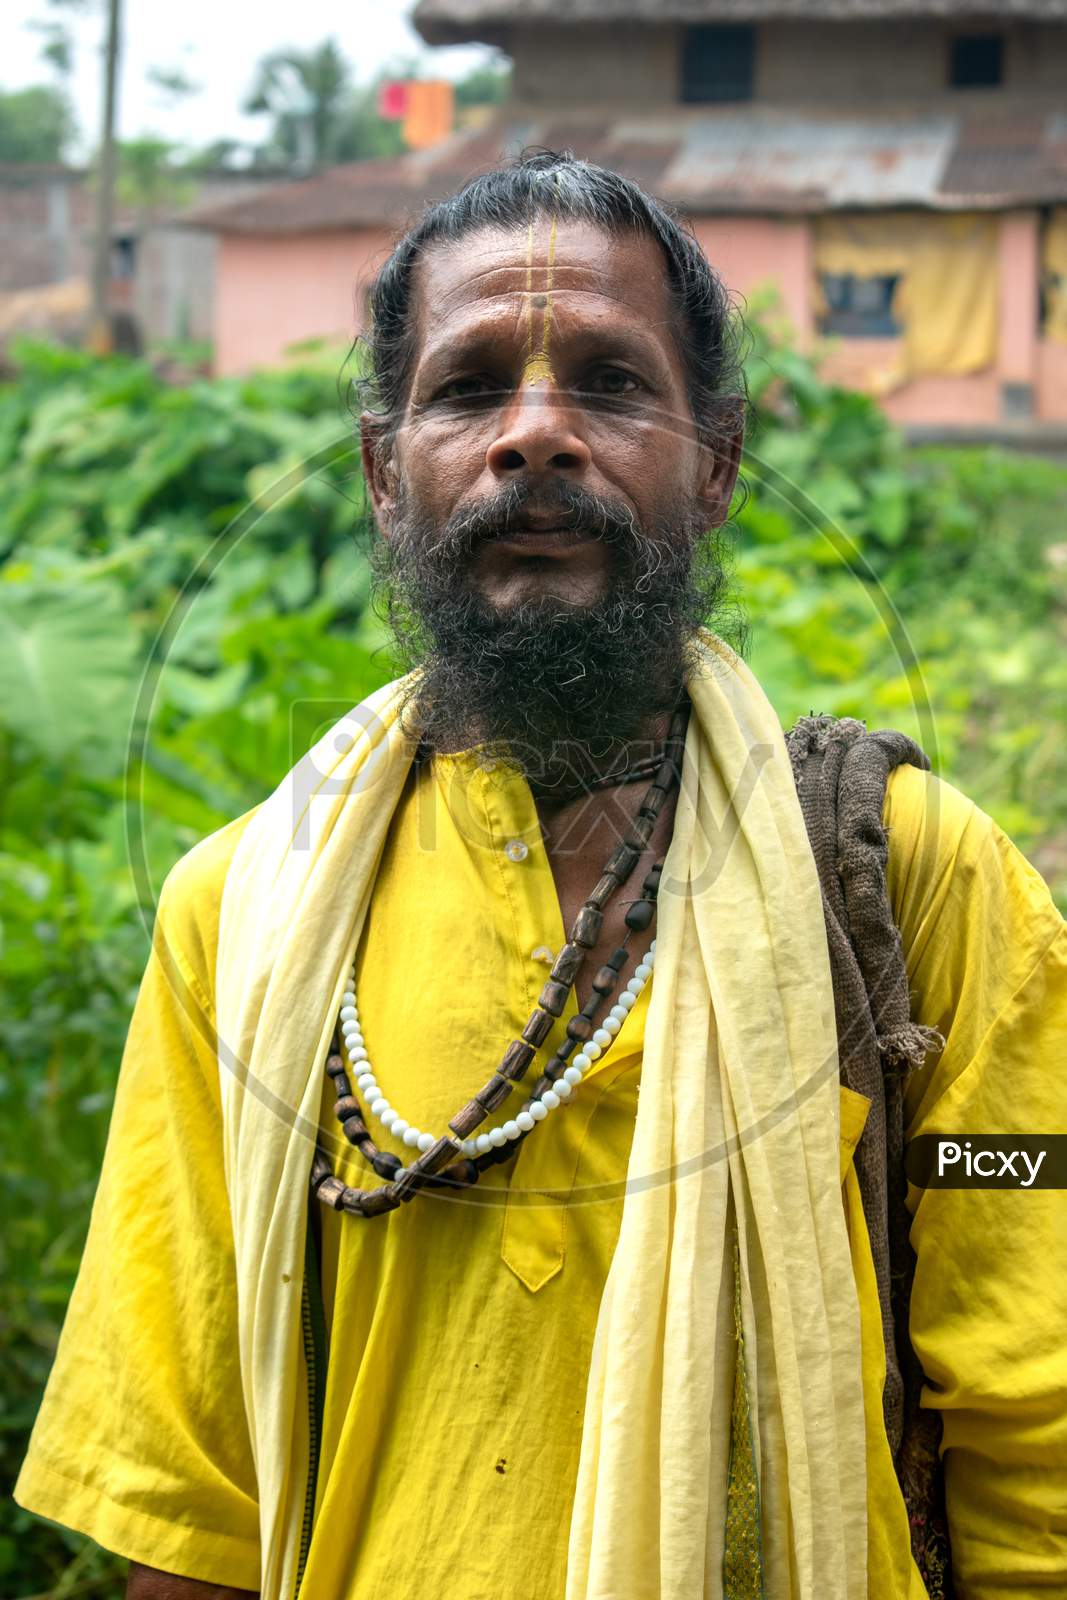 An Indian wanderer monk in a traditional yellow dress stands in a special posture.